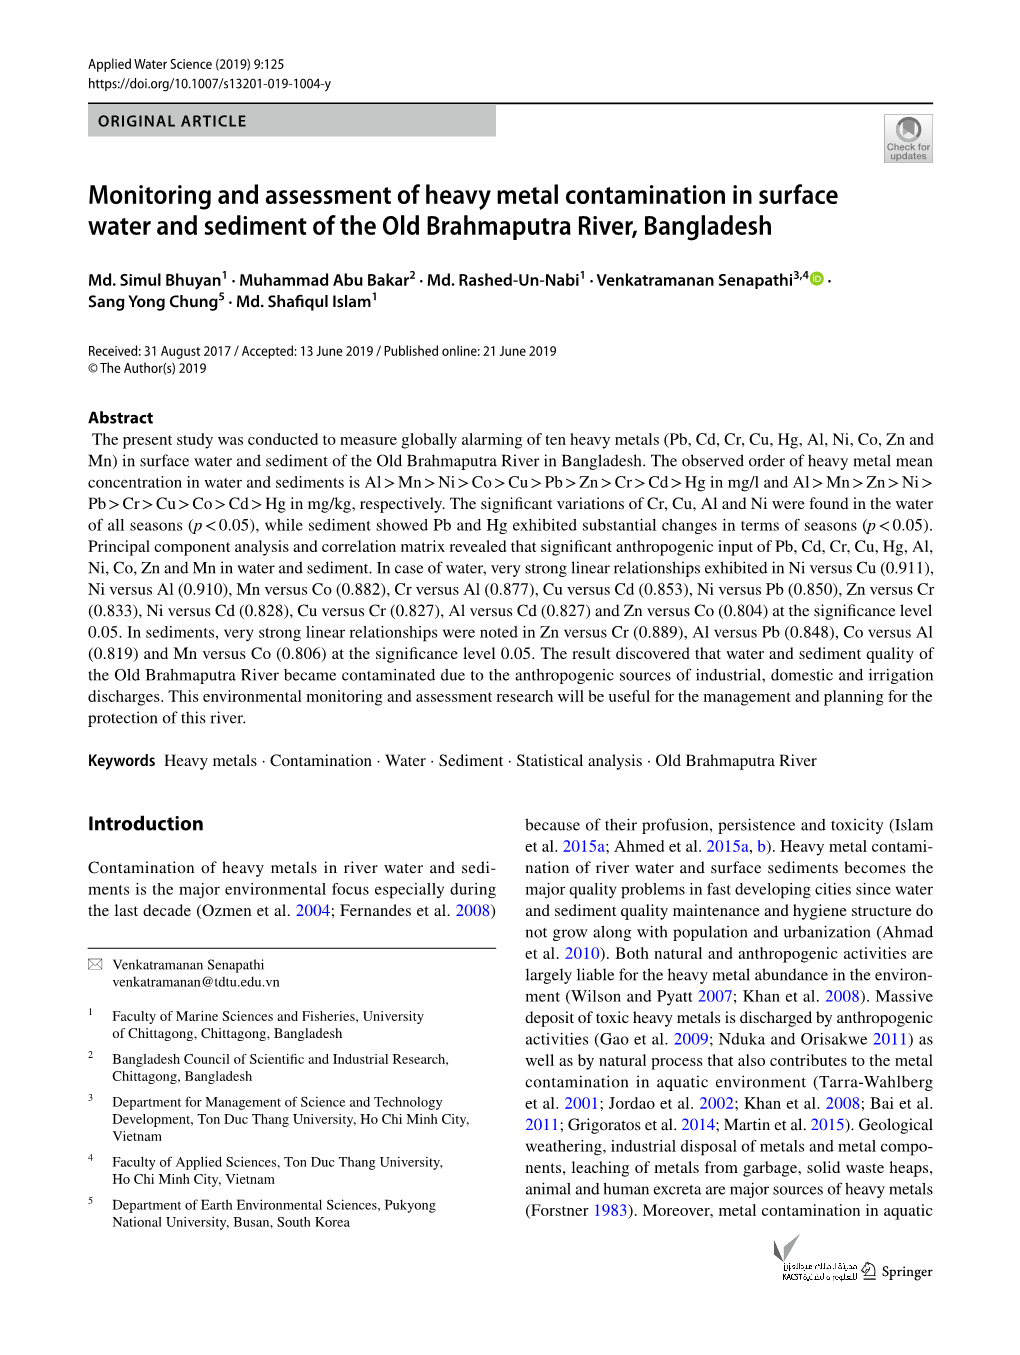 Monitoring and Assessment of Heavy Metal Contamination in Surface Water and Sediment of the Old Brahmaputra River, Bangladesh